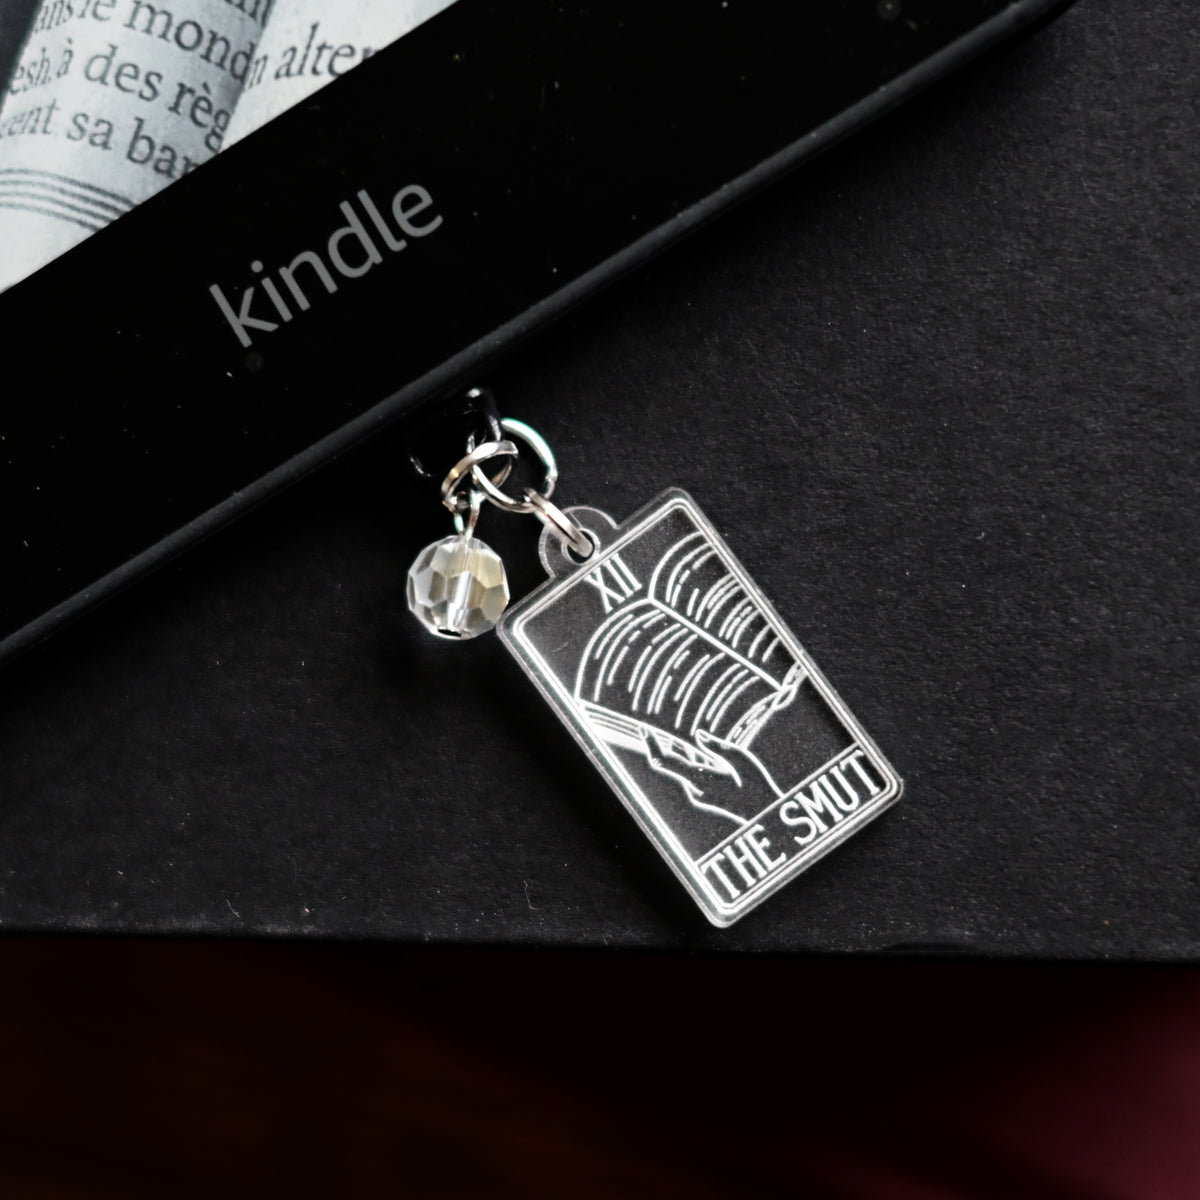 The Smut Tarot Card E-Reader Charm and Dust Plug for Kindle and other USB-C Charging Ports